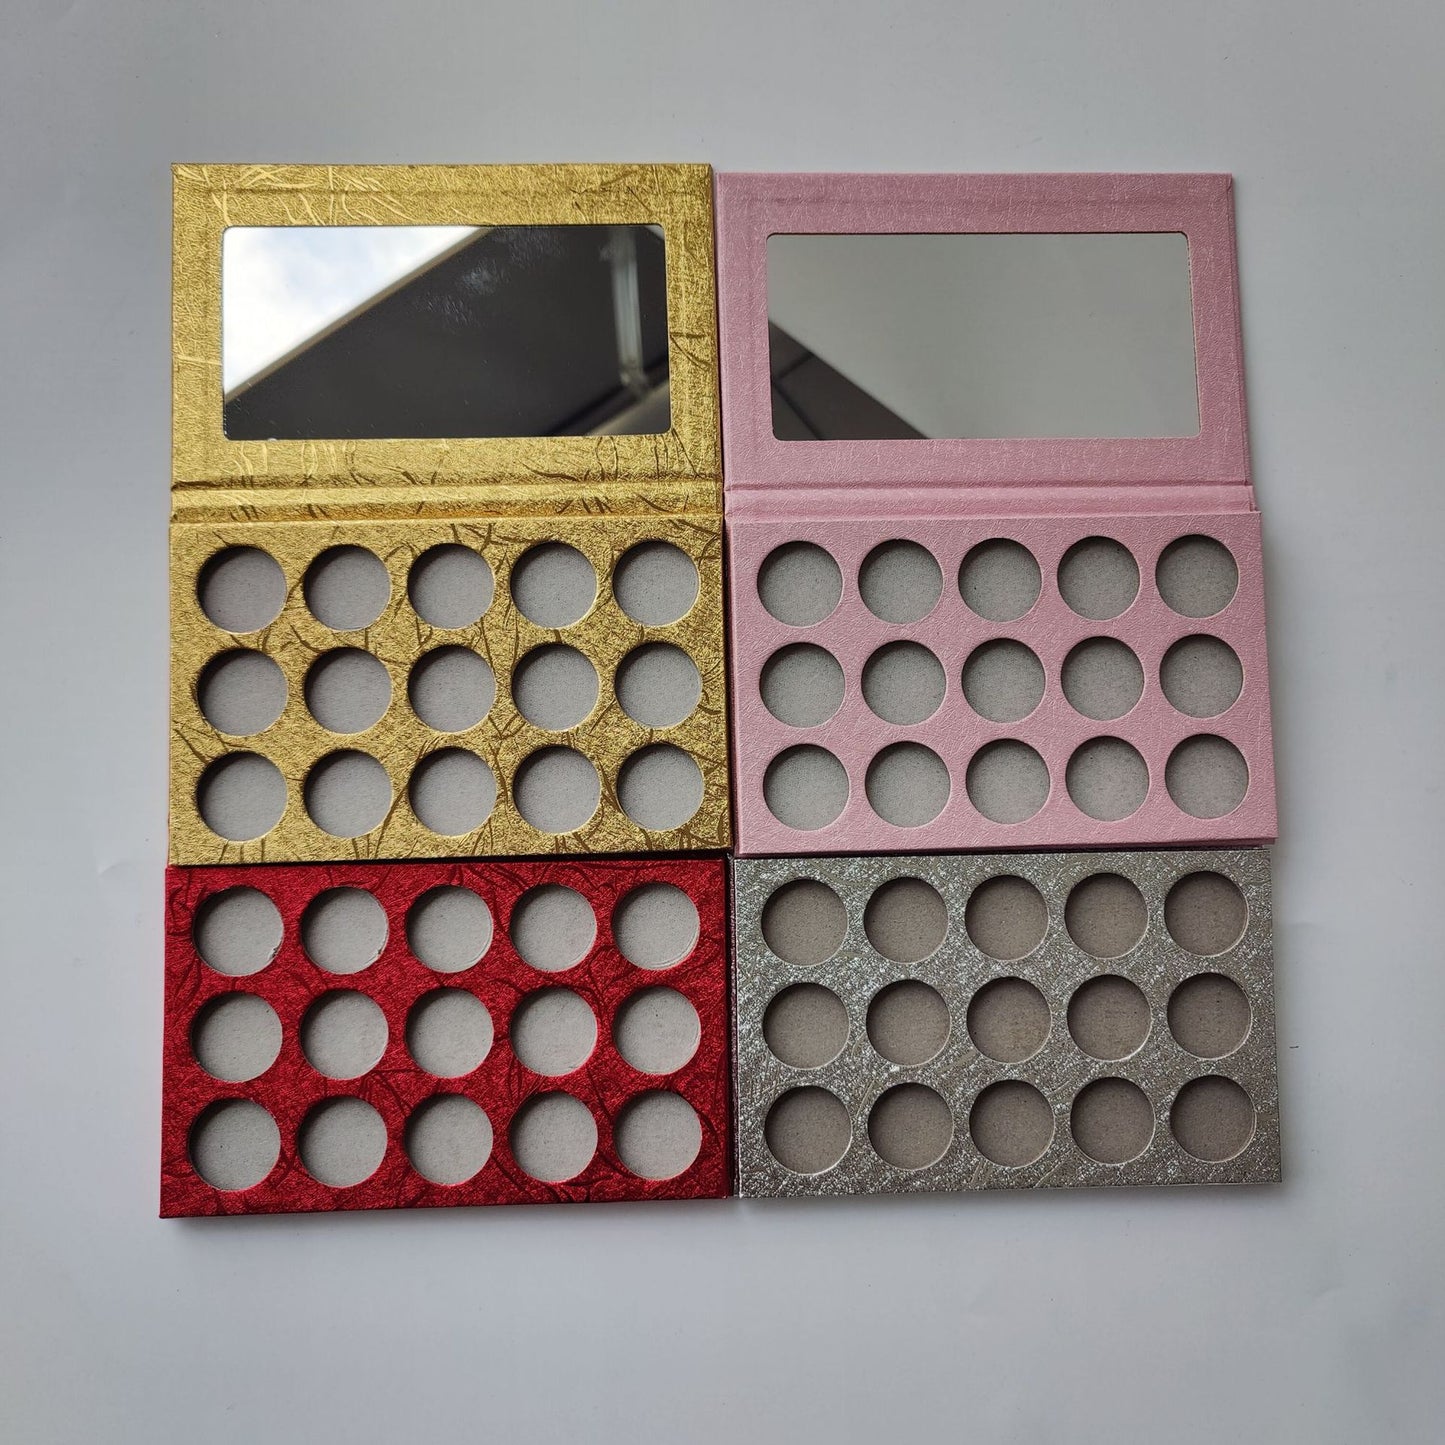 YT DIY eye shadow pallet 26mm with optional colors empty paper pallet